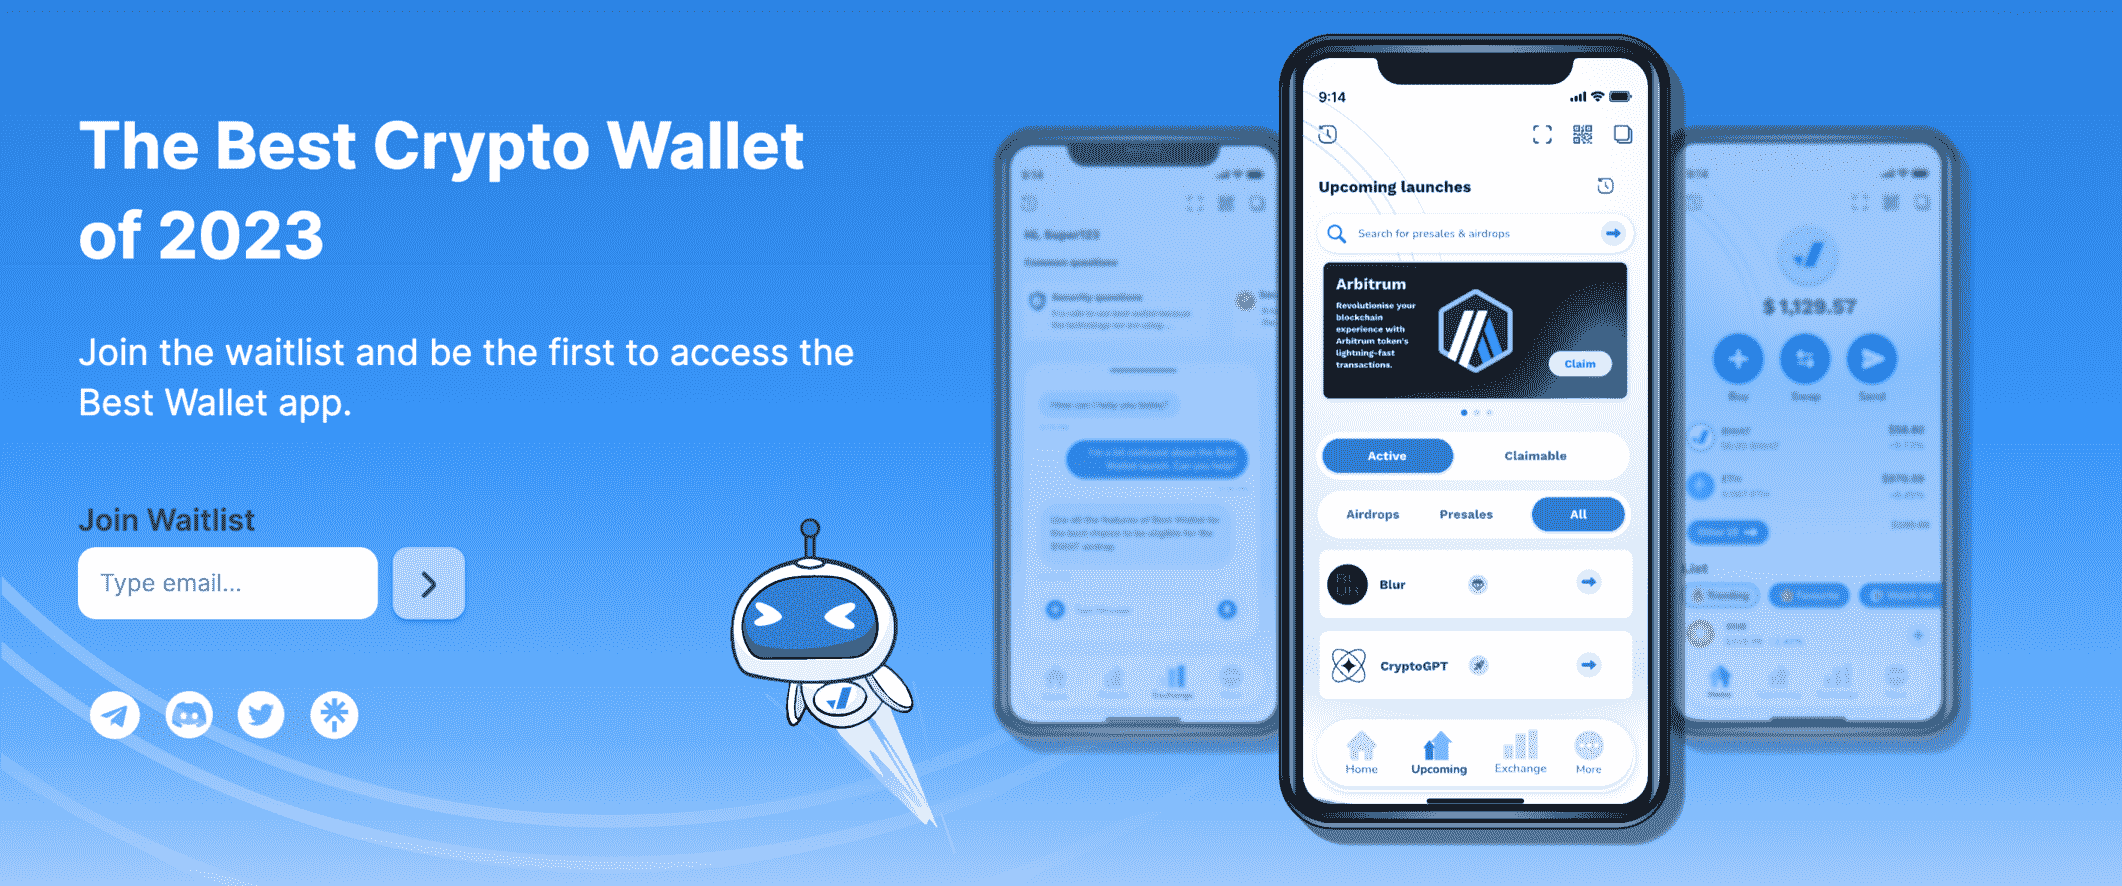 Best Wallet review